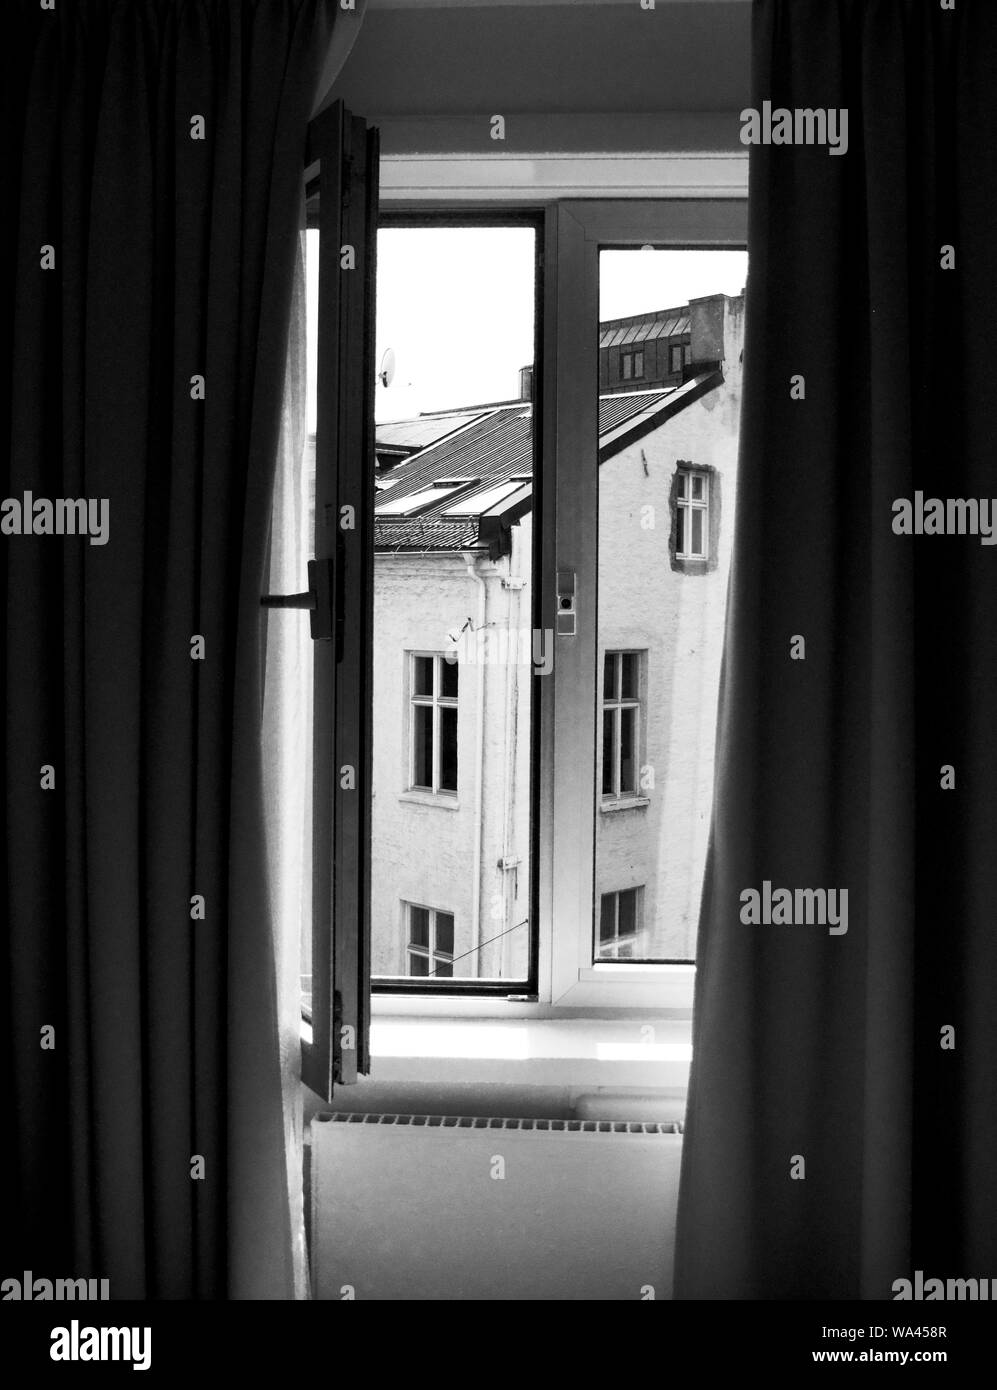 Vertical shot of an open window near curtains with a view of a house in black and white Stock Photo